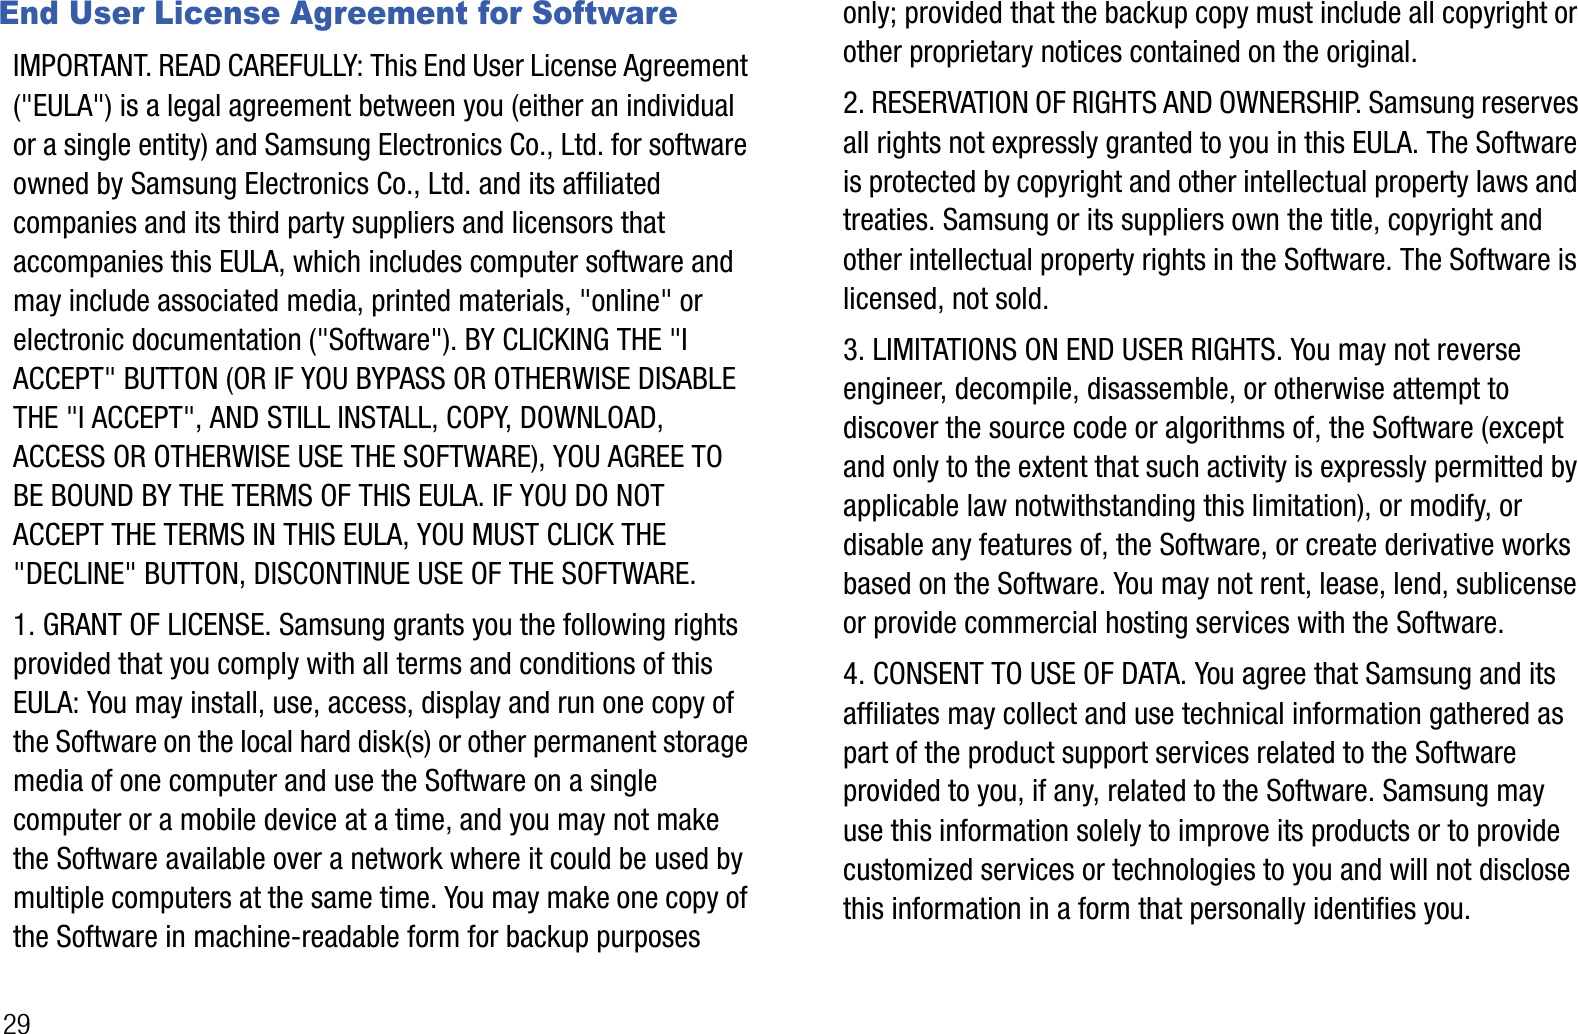 29End User License Agreement for SoftwareIMPORTANT. READ CAREFULLY: This End User License Agreement (&quot;EULA&quot;) is a legal agreement between you (either an individual or a single entity) and Samsung Electronics Co., Ltd. for software owned by Samsung Electronics Co., Ltd. and its affiliated companies and its third party suppliers and licensors that accompanies this EULA, which includes computer software and may include associated media, printed materials, &quot;online&quot; or electronic documentation (&quot;Software&quot;). BY CLICKING THE &quot;I ACCEPT&quot; BUTTON (OR IF YOU BYPASS OR OTHERWISE DISABLE THE &quot;I ACCEPT&quot;, AND STILL INSTALL, COPY, DOWNLOAD, ACCESS OR OTHERWISE USE THE SOFTWARE), YOU AGREE TO BE BOUND BY THE TERMS OF THIS EULA. IF YOU DO NOT ACCEPT THE TERMS IN THIS EULA, YOU MUST CLICK THE &quot;DECLINE&quot; BUTTON, DISCONTINUE USE OF THE SOFTWARE.1. GRANT OF LICENSE. Samsung grants you the following rights provided that you comply with all terms and conditions of this EULA: You may install, use, access, display and run one copy of the Software on the local hard disk(s) or other permanent storage media of one computer and use the Software on a single computer or a mobile device at a time, and you may not make the Software available over a network where it could be used by multiple computers at the same time. You may make one copy of the Software in machine-readable form for backup purposes only; provided that the backup copy must include all copyright or other proprietary notices contained on the original. 2. RESERVATION OF RIGHTS AND OWNERSHIP. Samsung reserves all rights not expressly granted to you in this EULA. The Software is protected by copyright and other intellectual property laws and treaties. Samsung or its suppliers own the title, copyright and other intellectual property rights in the Software. The Software is licensed, not sold.3. LIMITATIONS ON END USER RIGHTS. You may not reverse engineer, decompile, disassemble, or otherwise attempt to discover the source code or algorithms of, the Software (except and only to the extent that such activity is expressly permitted by applicable law notwithstanding this limitation), or modify, or disable any features of, the Software, or create derivative works based on the Software. You may not rent, lease, lend, sublicense or provide commercial hosting services with the Software.4. CONSENT TO USE OF DATA. You agree that Samsung and its affiliates may collect and use technical information gathered as part of the product support services related to the Software provided to you, if any, related to the Software. Samsung may use this information solely to improve its products or to provide customized services or technologies to you and will not disclose this information in a form that personally identifies you.